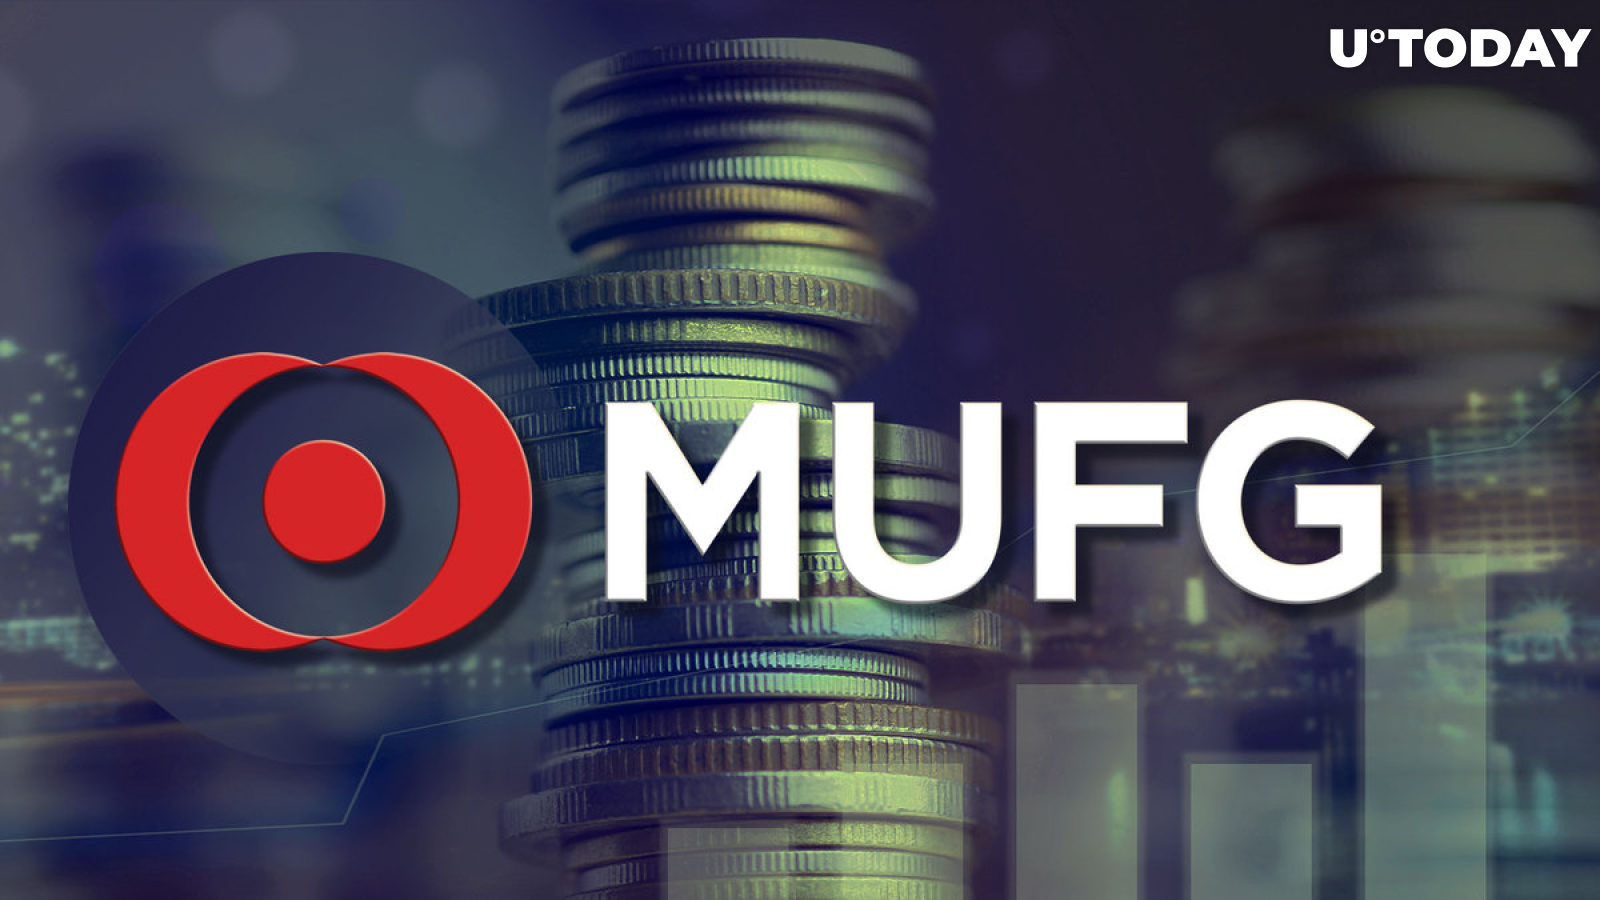 Japan's Banking Giant MUFG Plans to Issue Stablecoins: Bloomberg